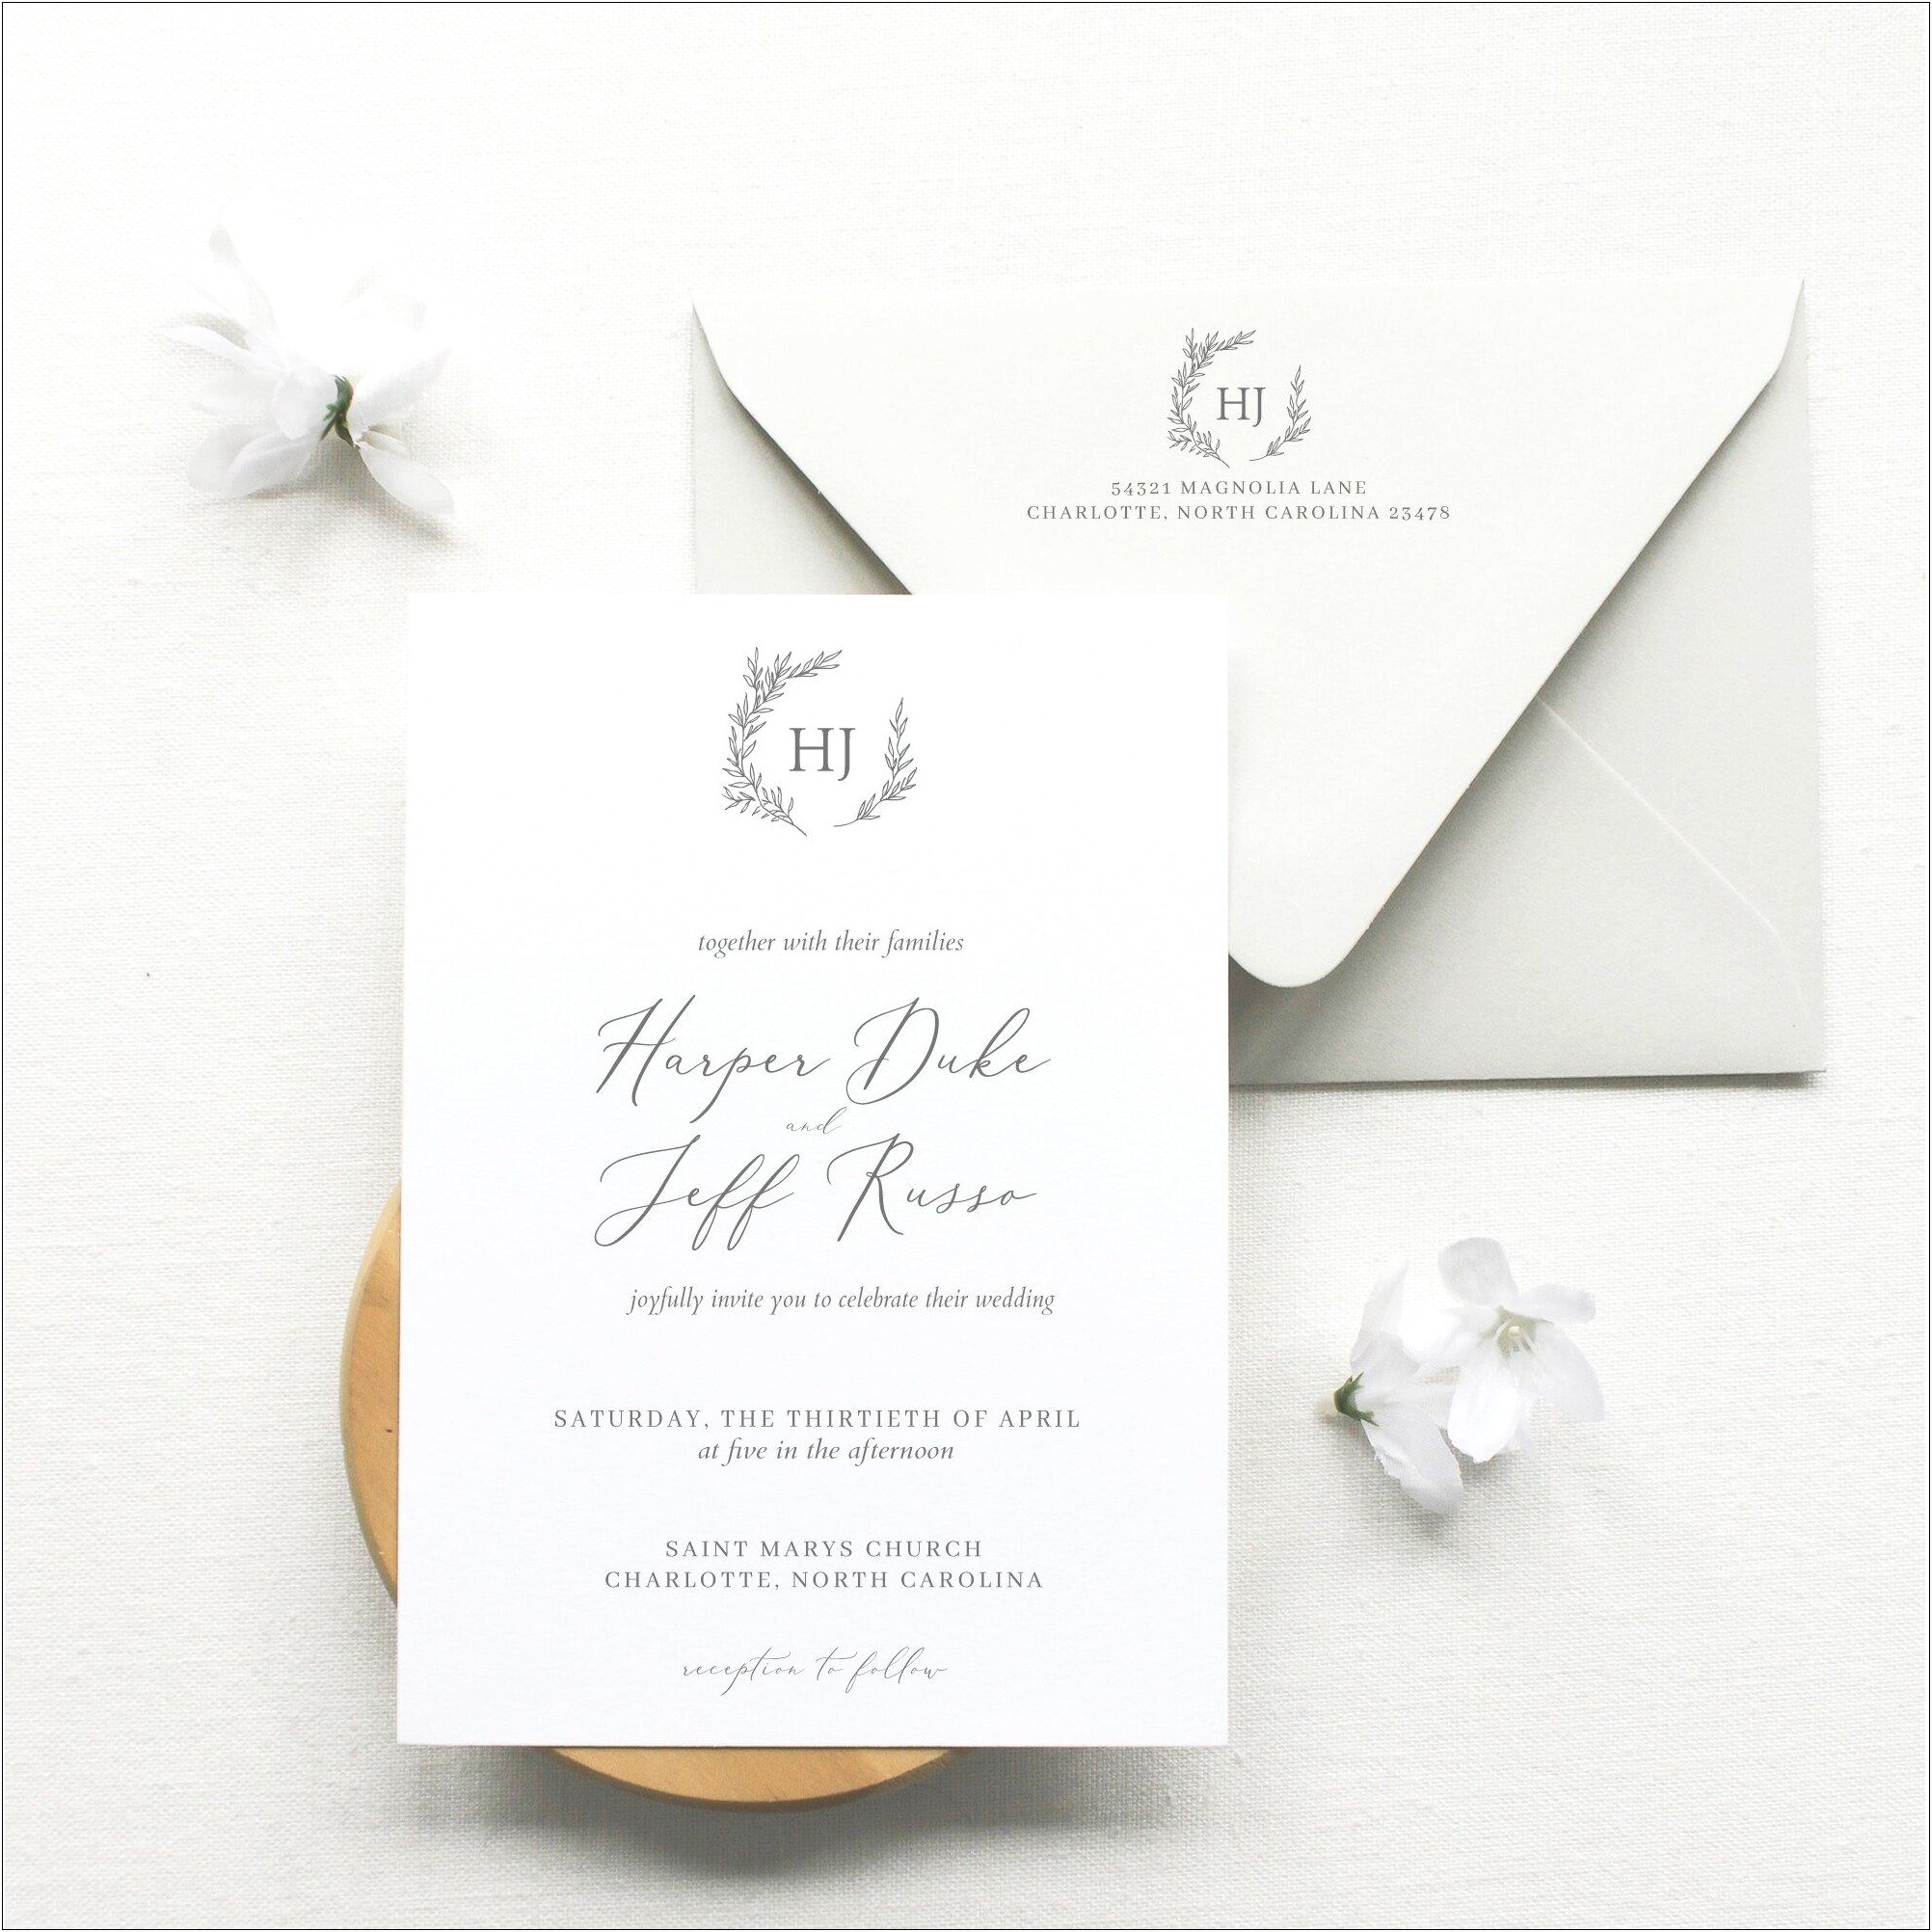 Is It Okay To Hand Deliver Wedding Invitations